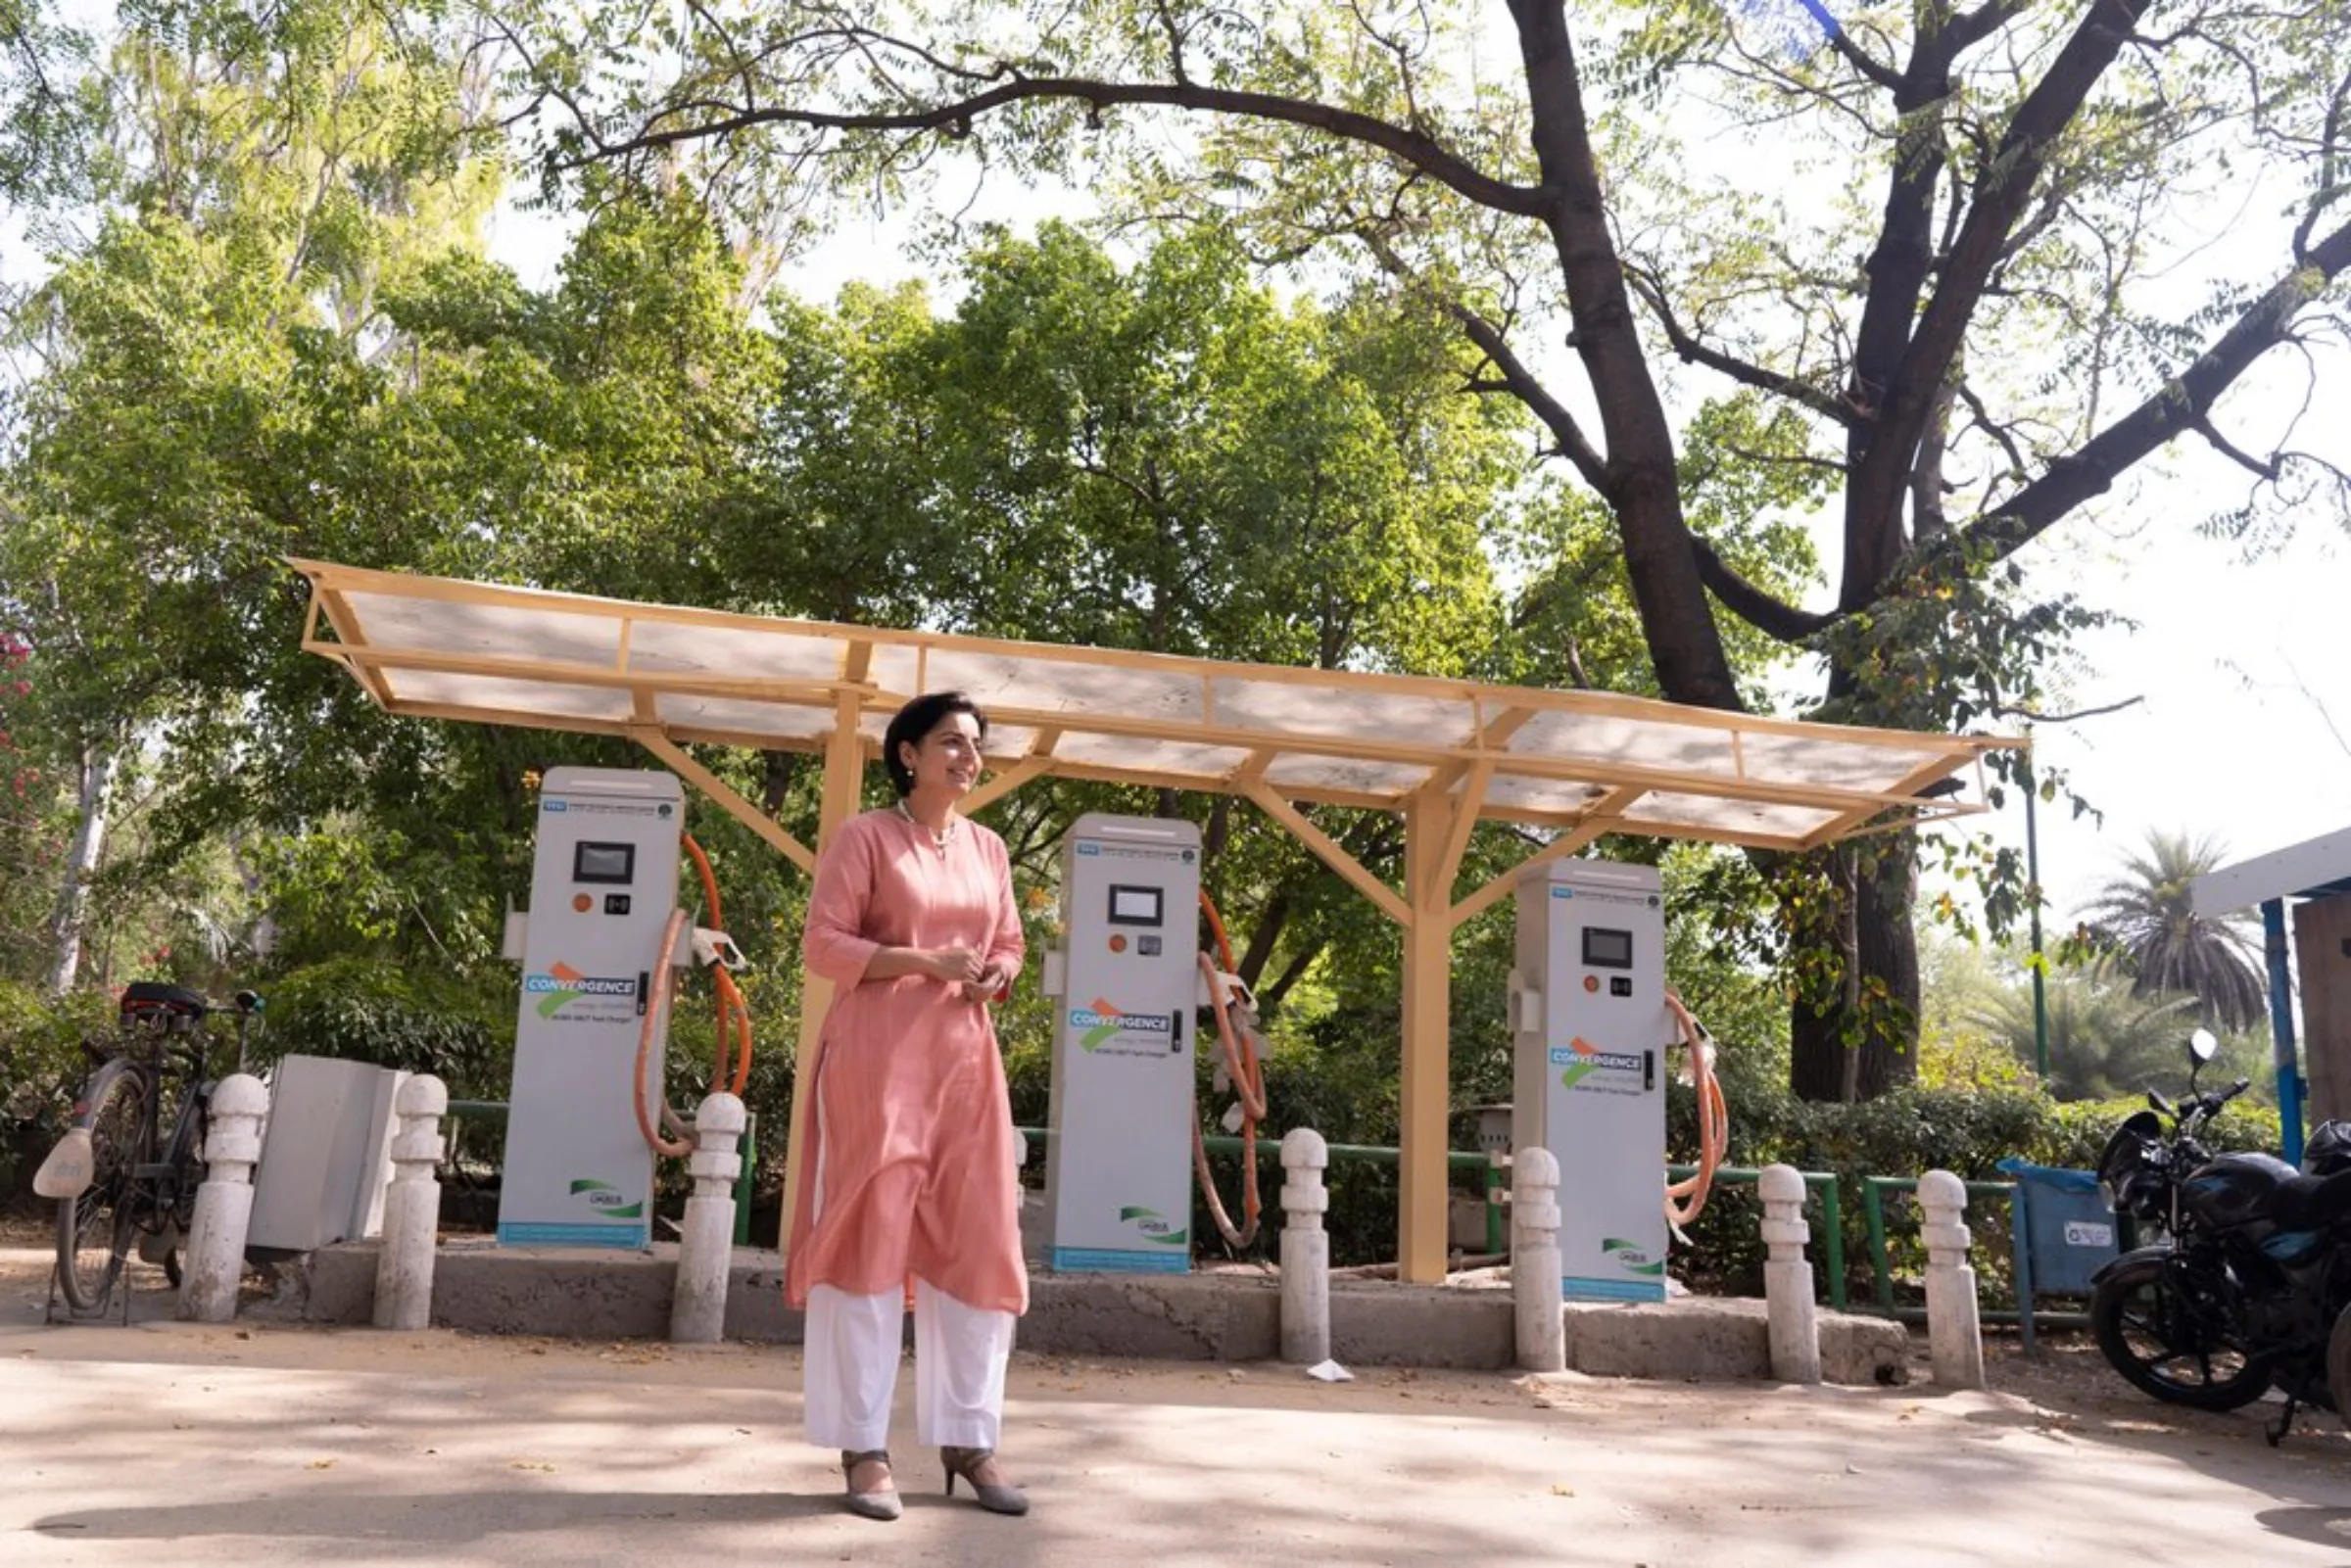 Mahua Acharya, CEO of Convergence Energy Services Limited, poses for a picture at an electric vehicle charging station in Delhi, April 6, 2022